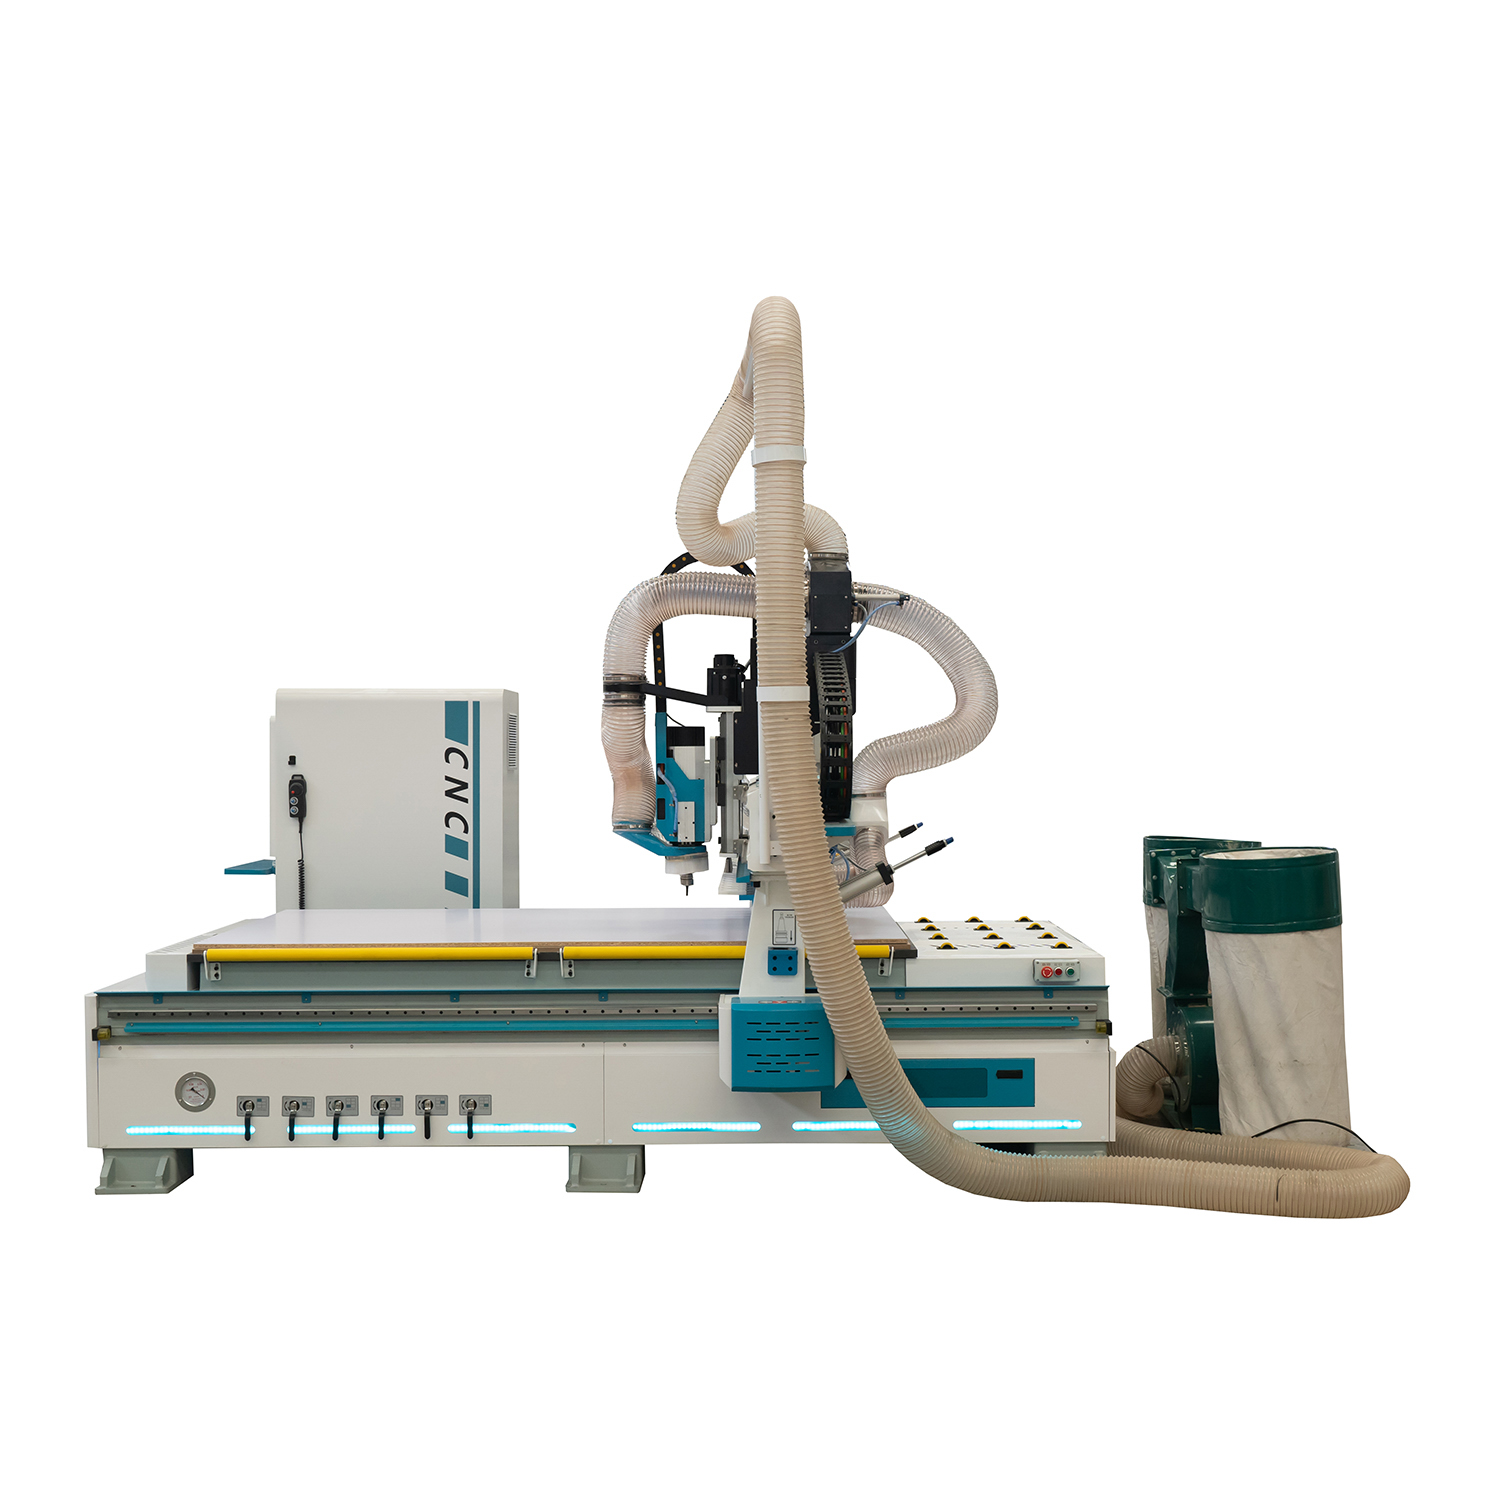 4X8 FT Automatic 3D Wood Carving Machine for Composite MDF Kitchen Cabinet Furniture Featured Image